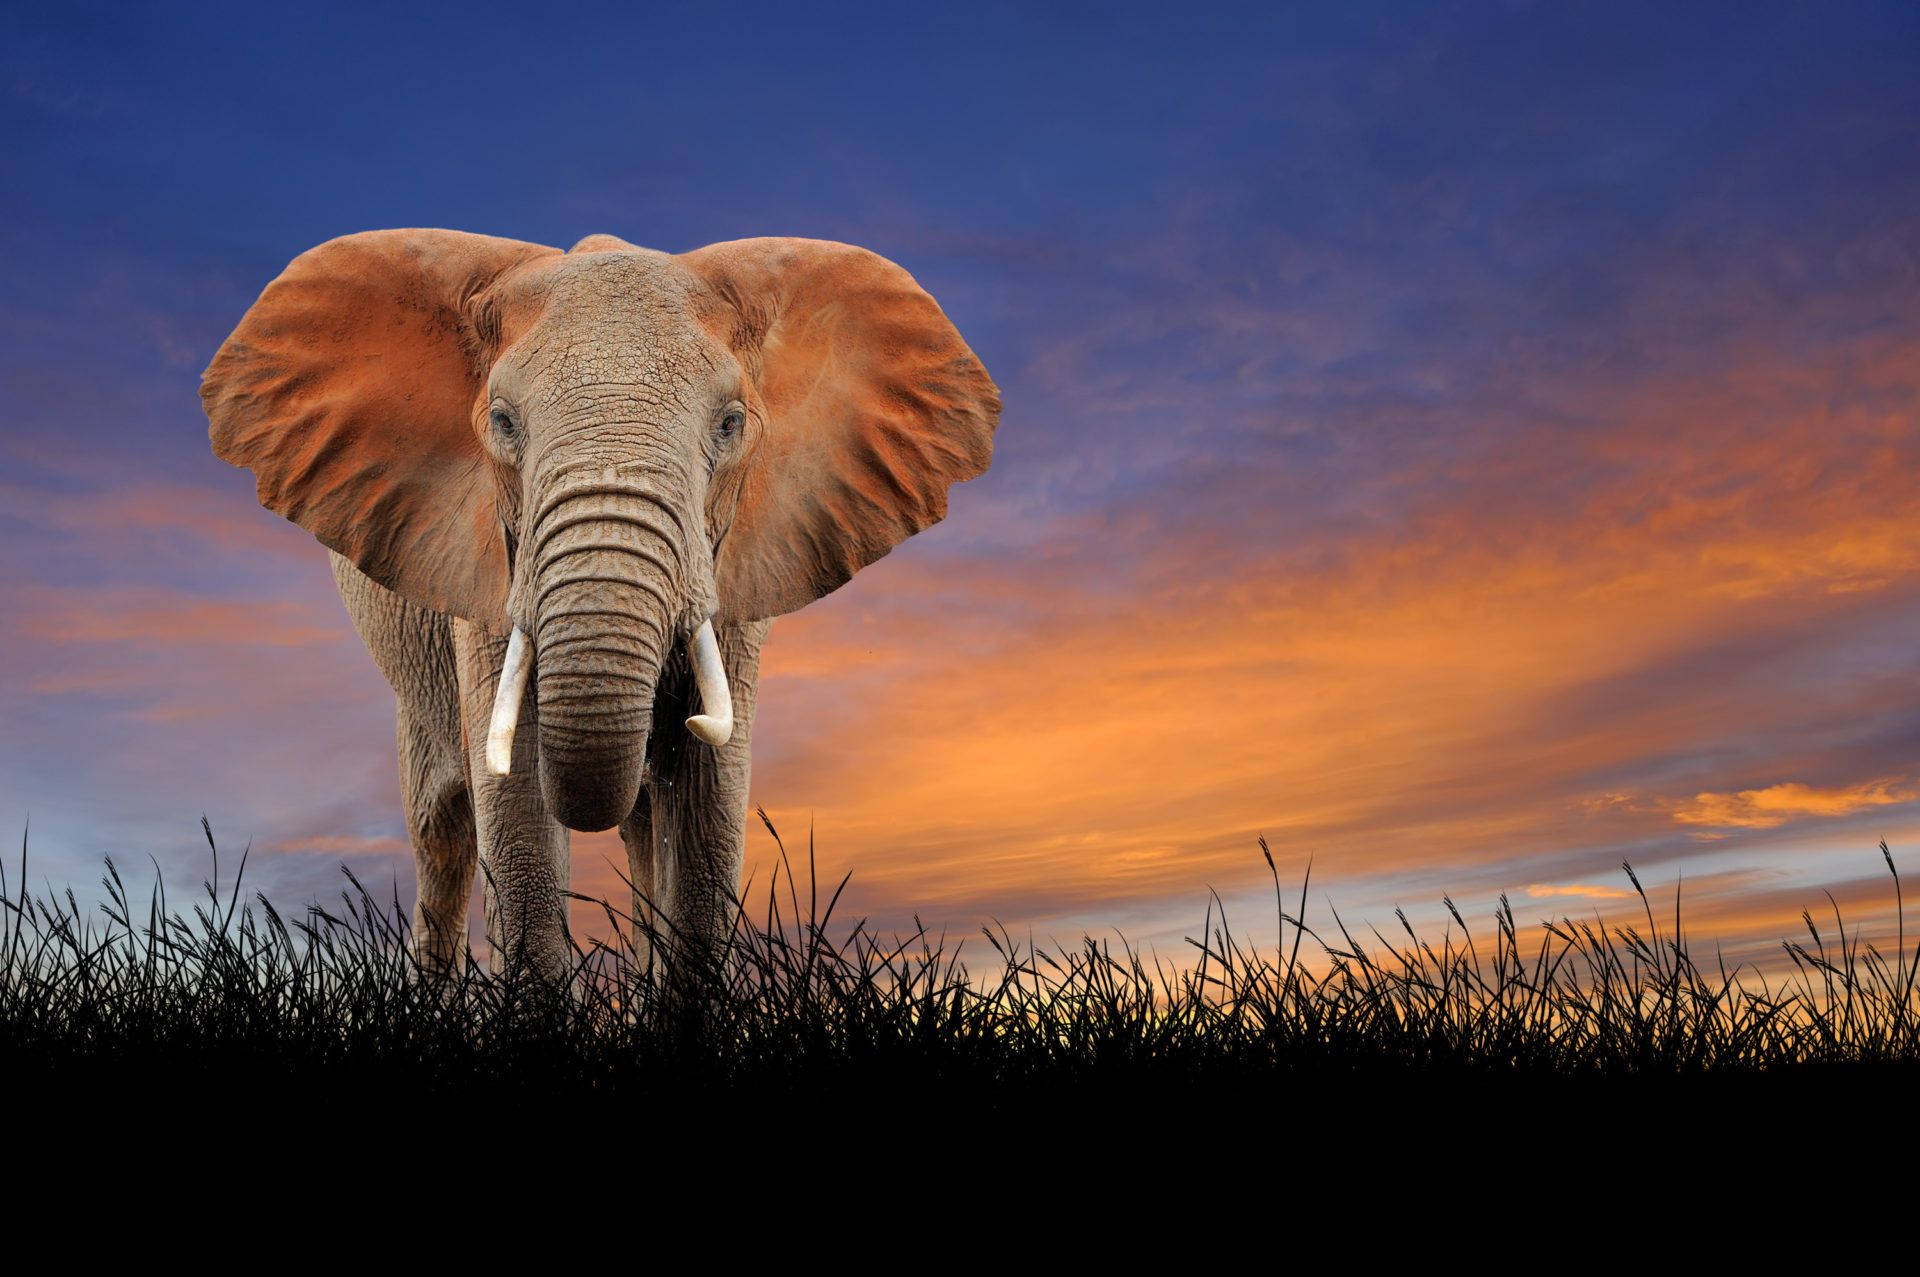 An endearing elephant pauses to look at the camera Wallpaper